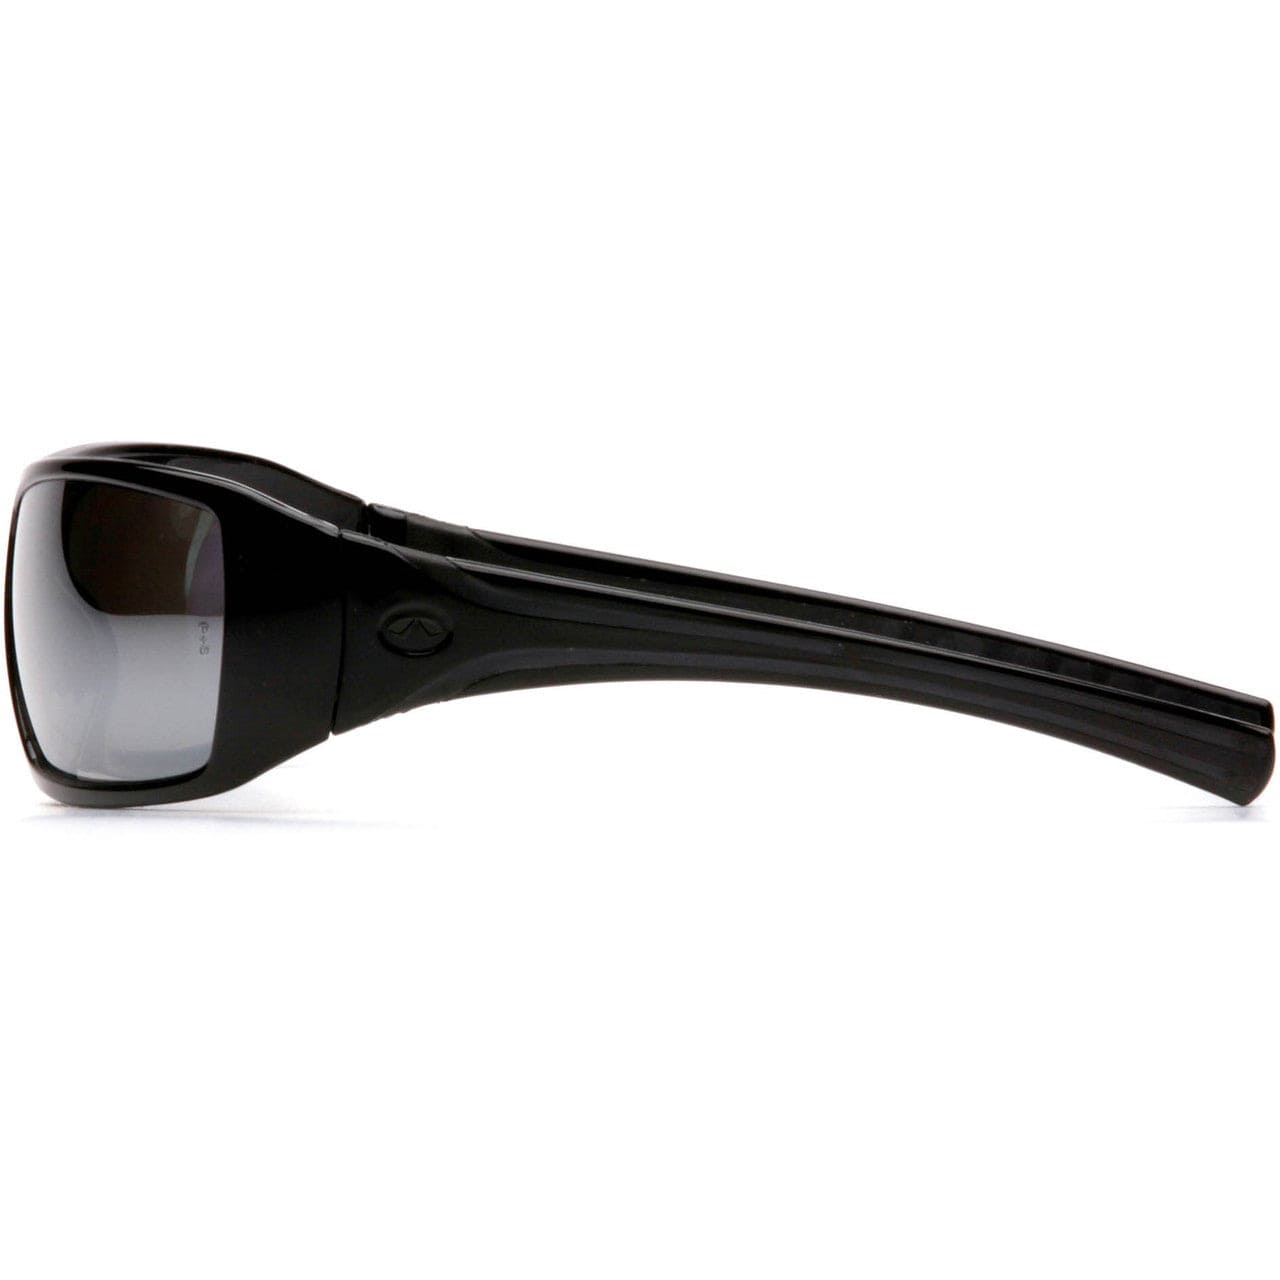 Pyramex Goliath Safety Glasses with Black Frame and Silver Mirror Lens SB5670D Side View